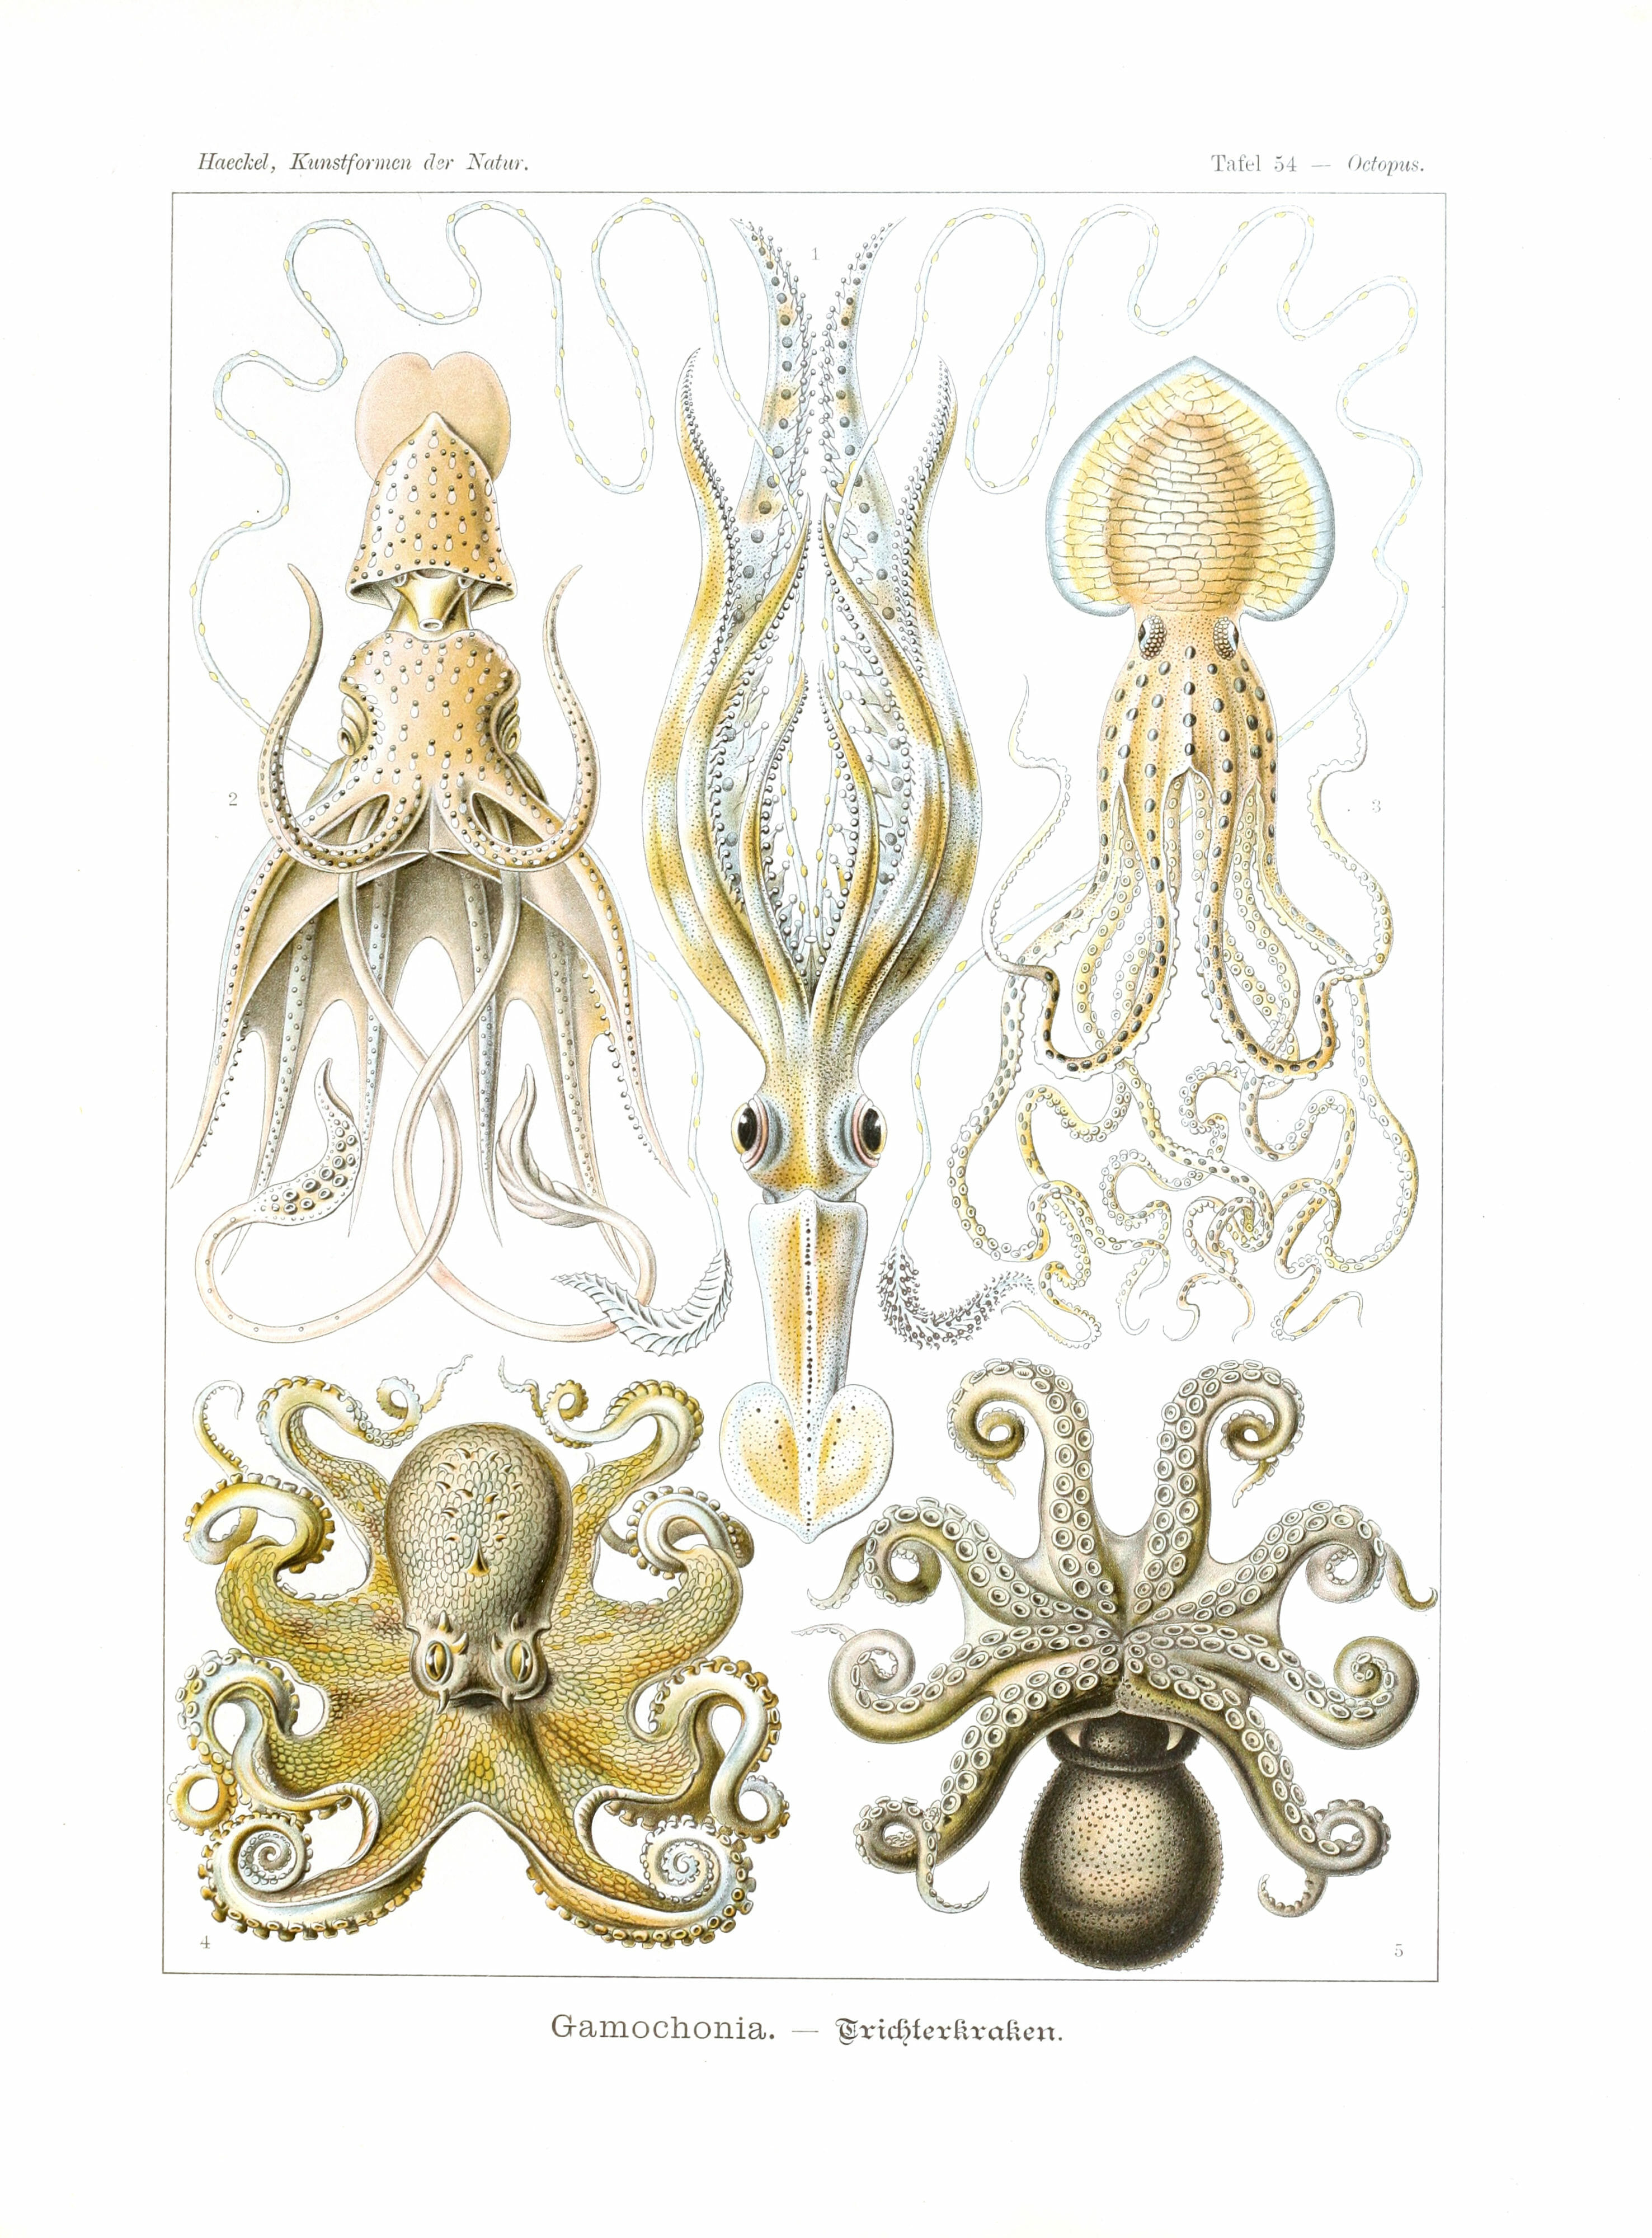 Free public domain Ernst Haeckel Octopus Illustration from the 19th-century book Art Forms in Nature.